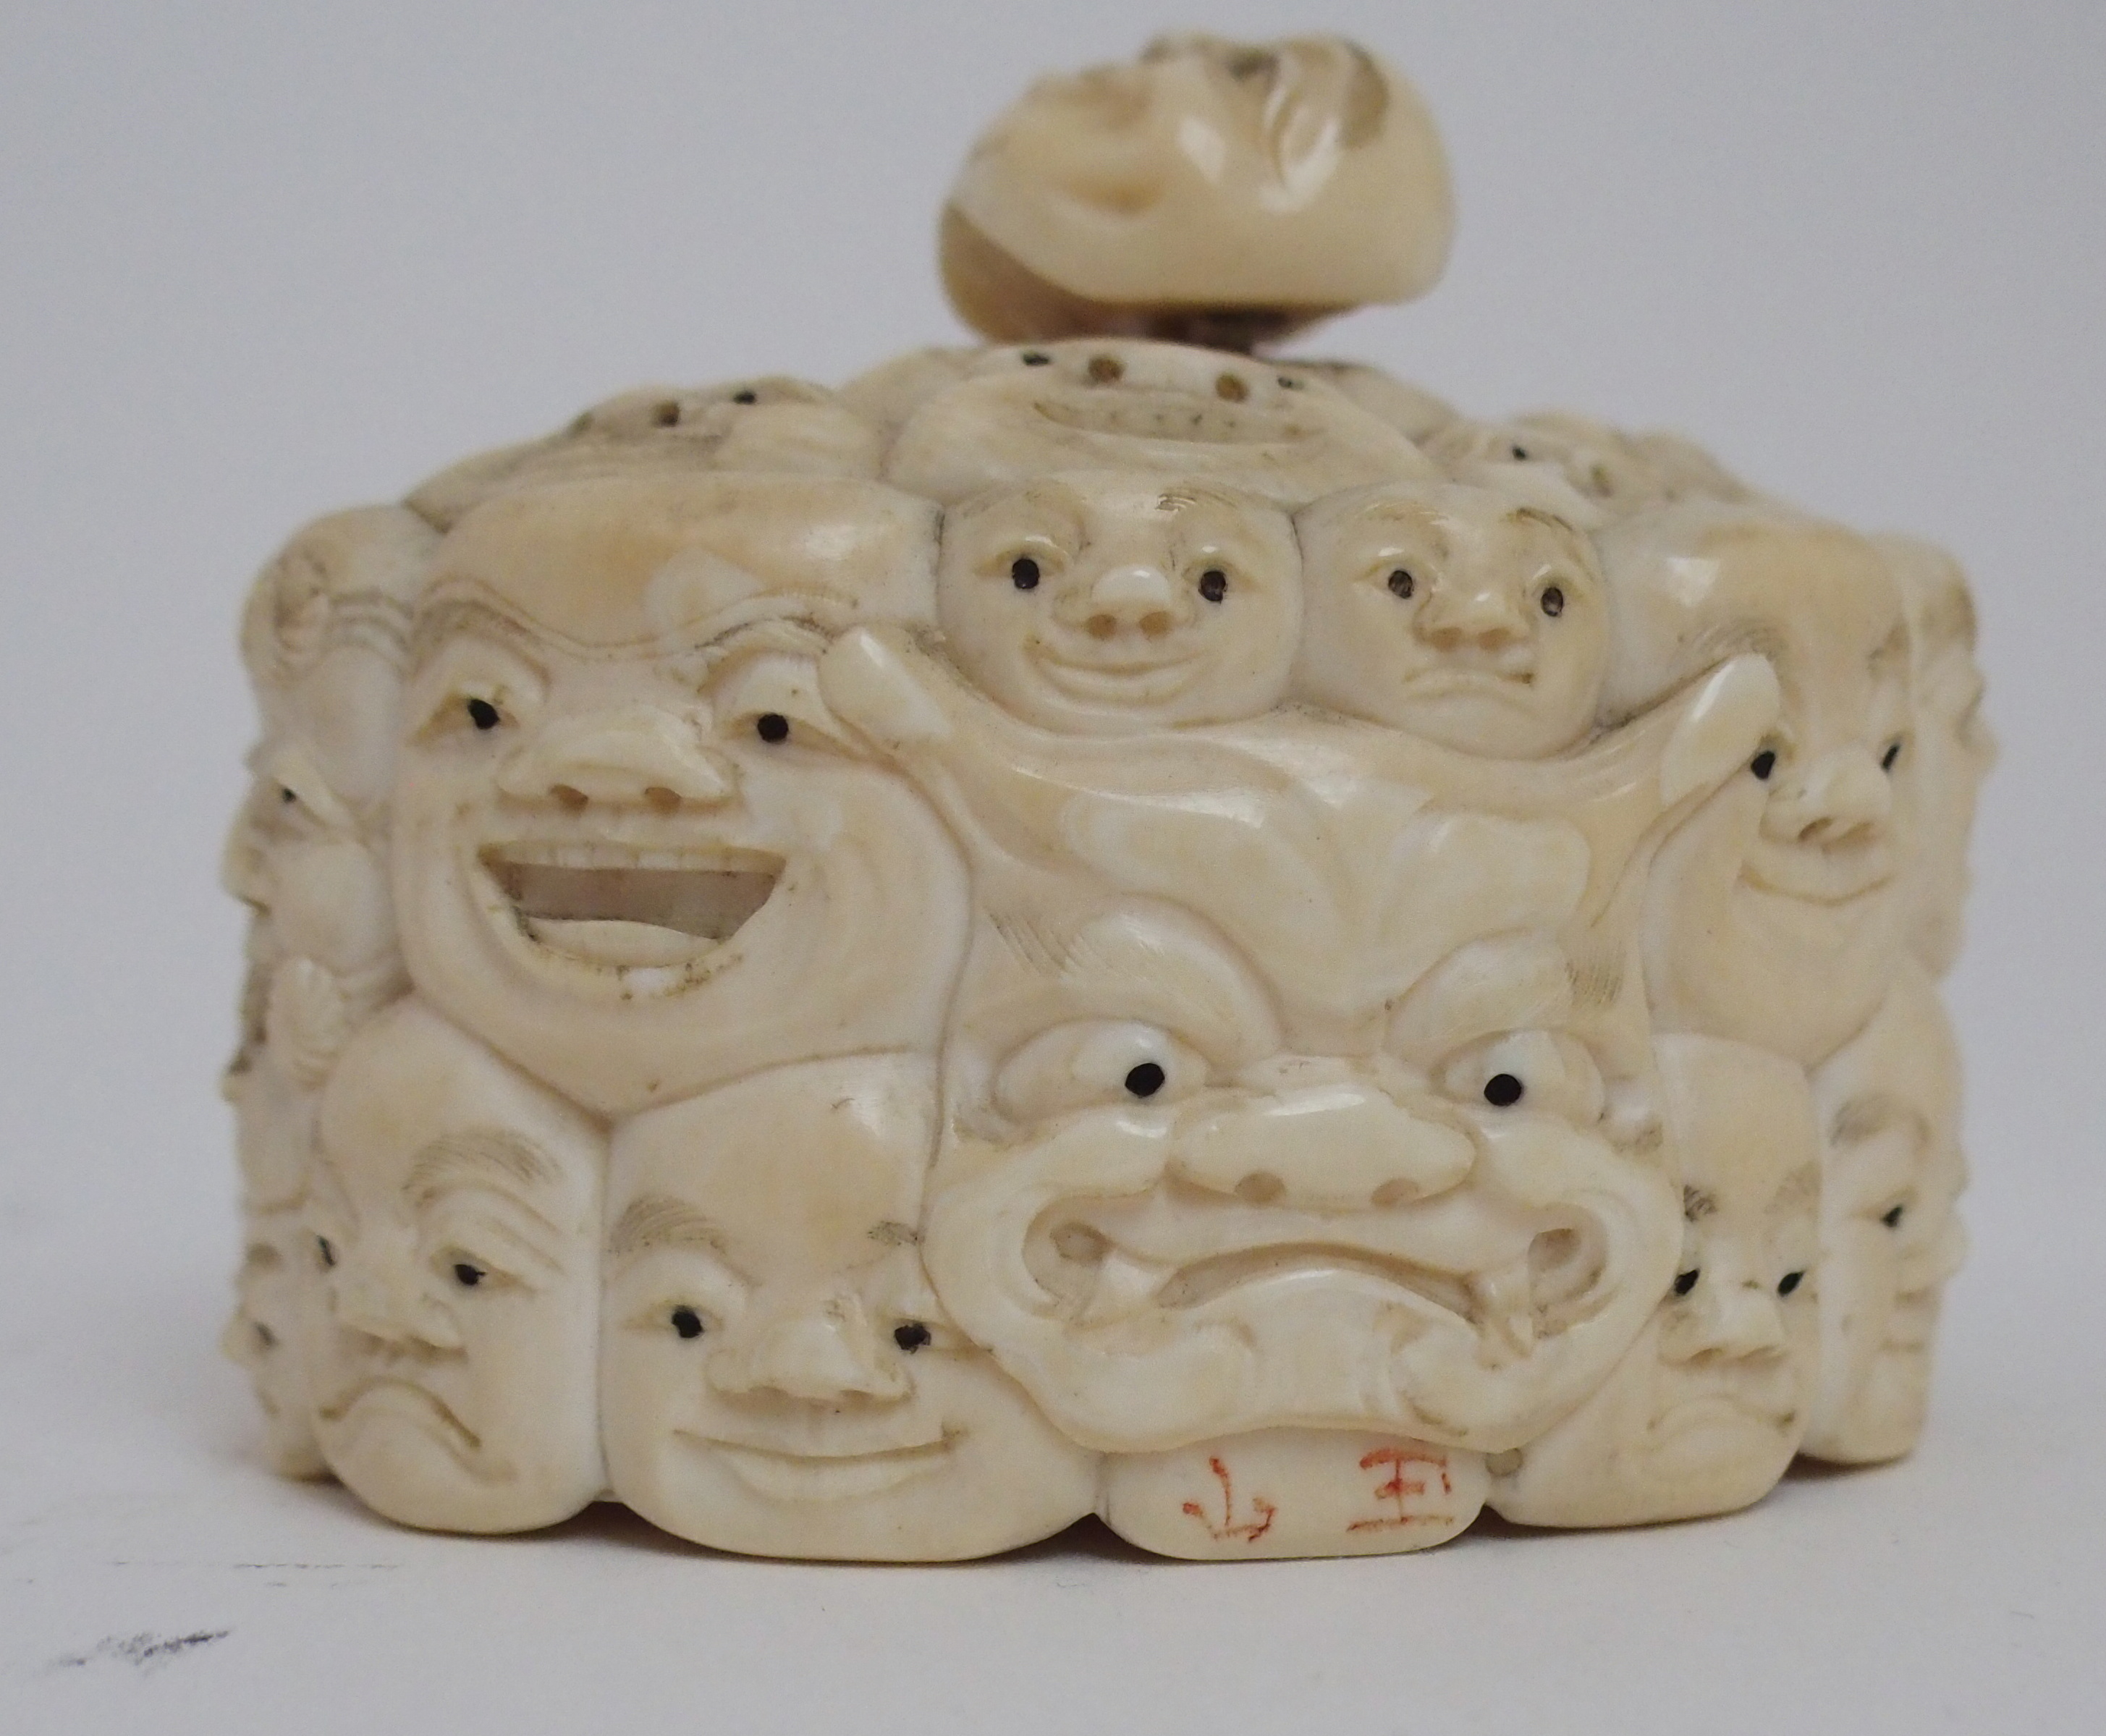 A JAPANESE IVORY OVAL MASK BOX AND COVER carved with many face masks, the cover with mask finial, - Image 9 of 14